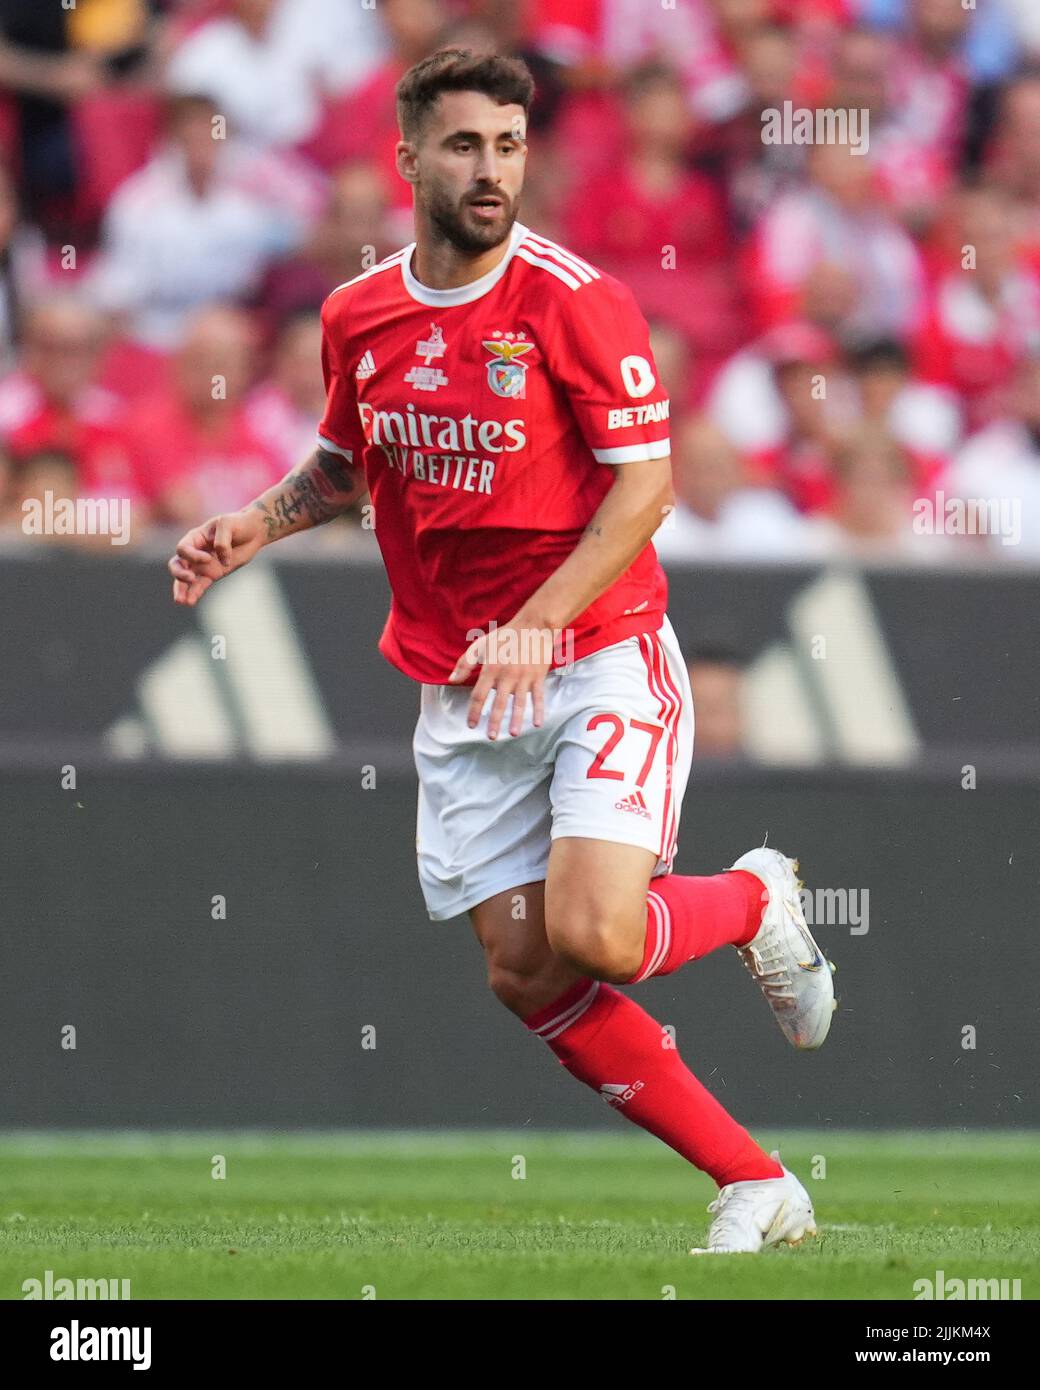 Lisbon, Portugal. July 25, 2022, Rafa Silva of Benfica during the Pre-Season Friendly Eusebio Cup match between SL Benfica and Newcastle United FC played at Estadio da Luz on July 25, 2022 in Lisbon, Portugal. (Photo by Bagu Blanco / PRESSINPHOTO) Stock Photo